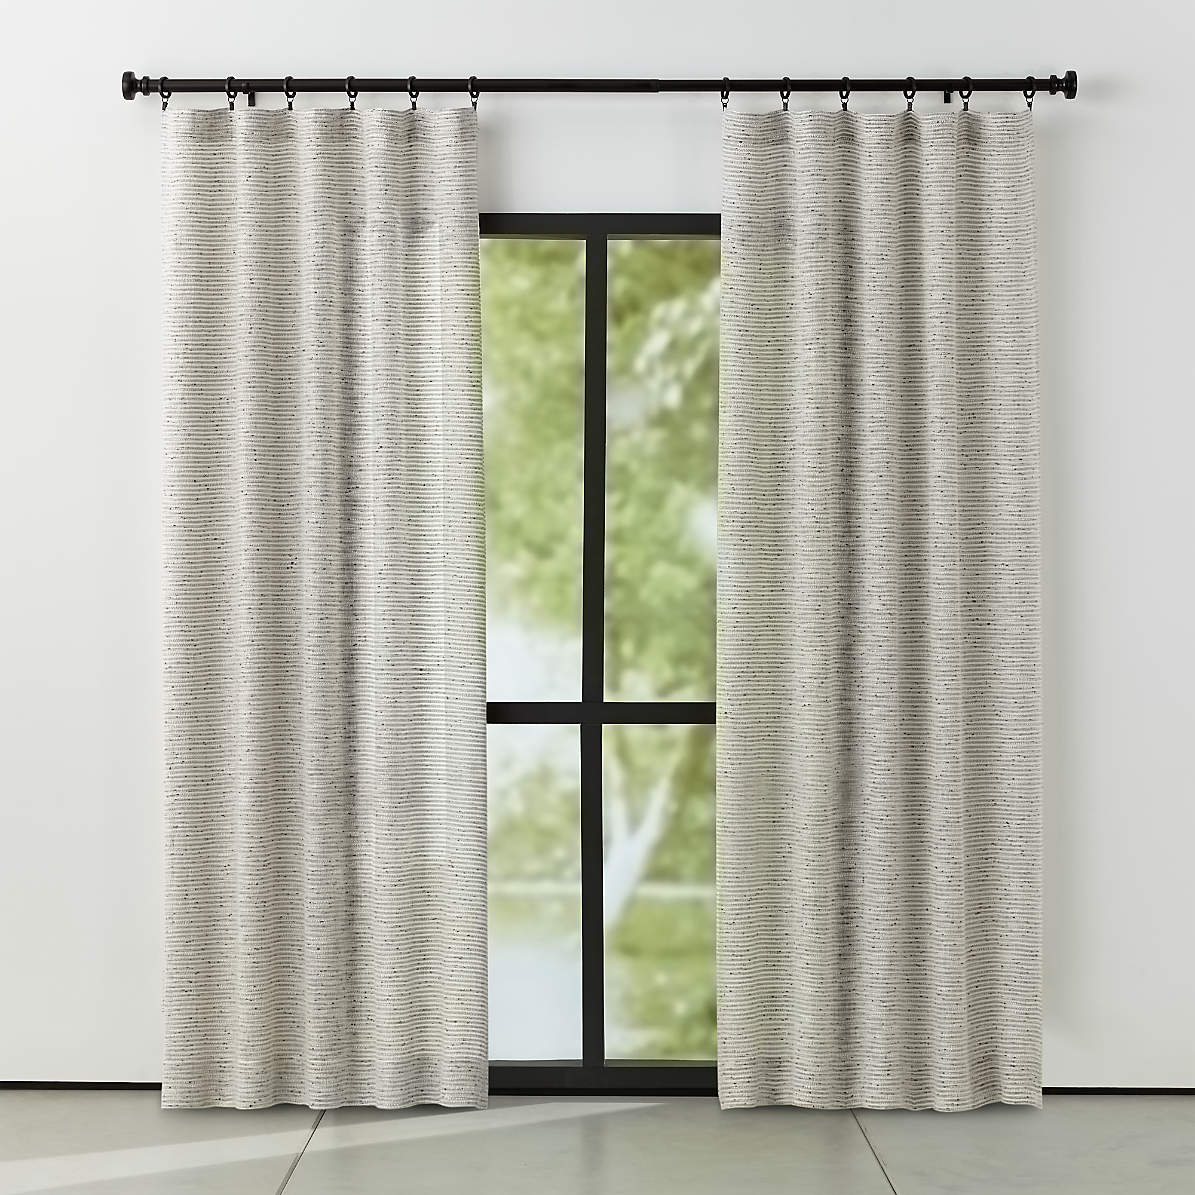 Vesta Textured Curtains Crate, Outdoor Curtains Clearance Canada